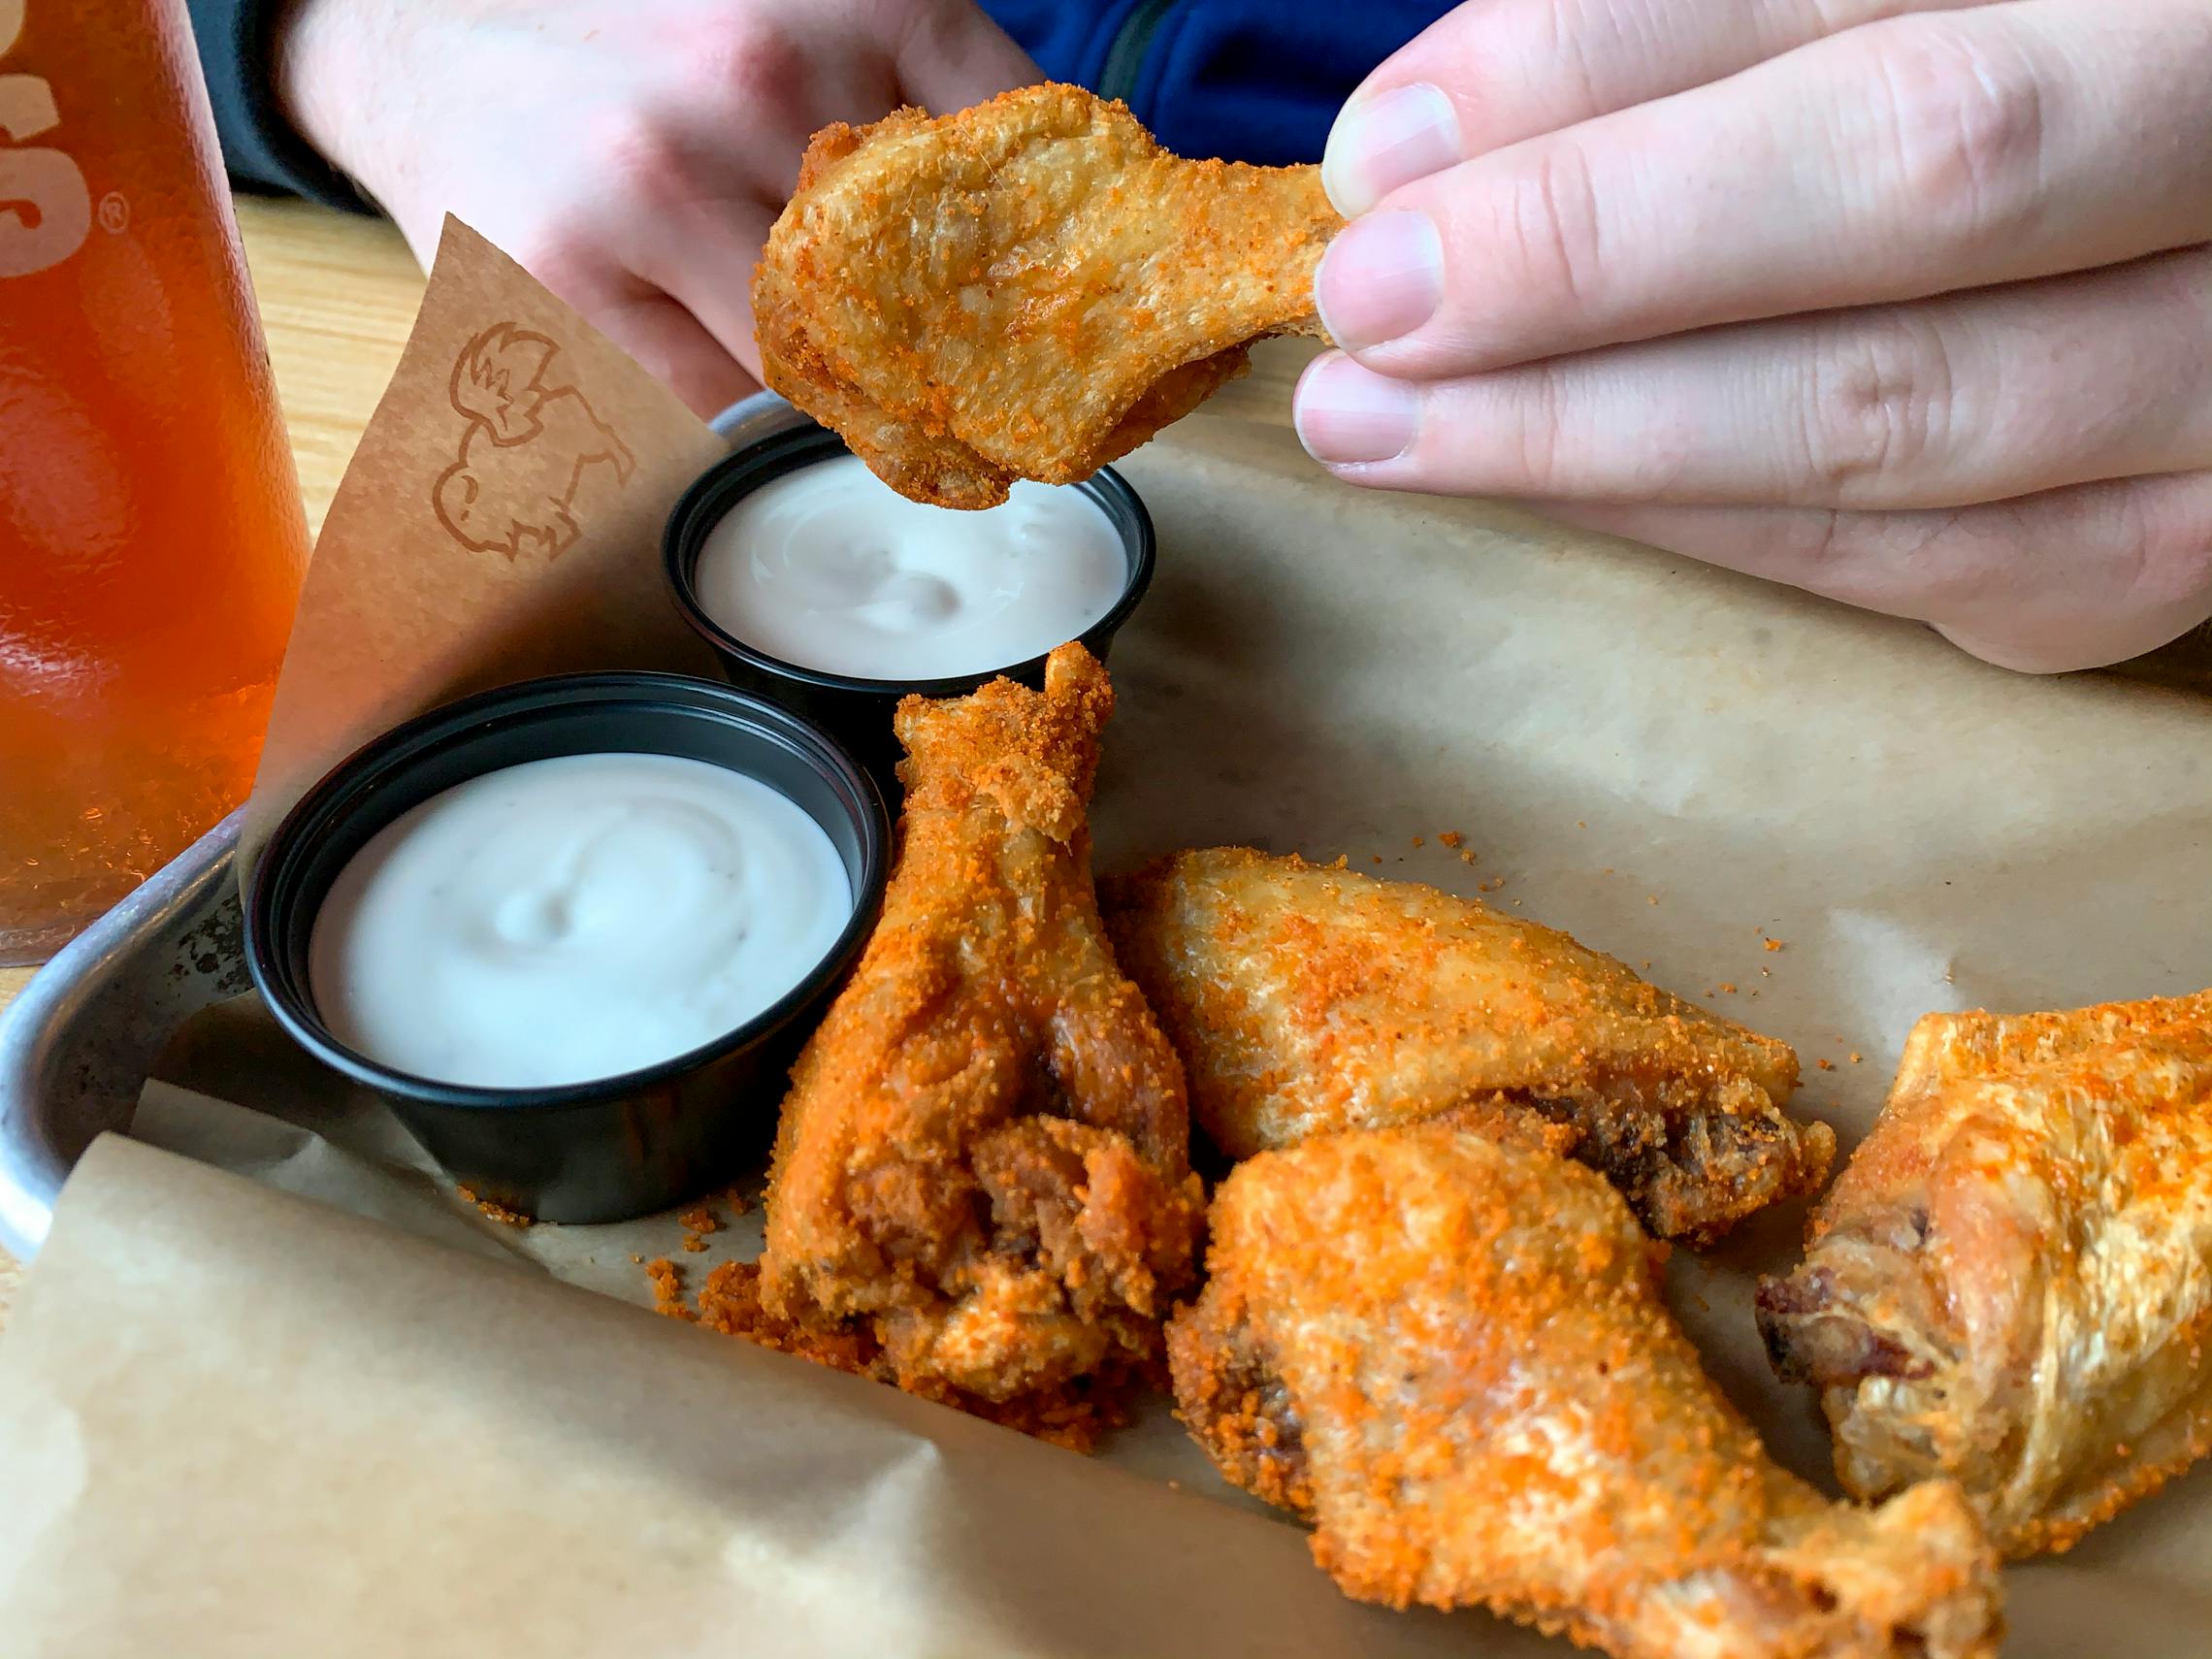 A dry rub seasoned traditional buffalo wings being dipped into ranch dressing, something to enjoy during Chicken Wing Day Buffalo Wild Wings.